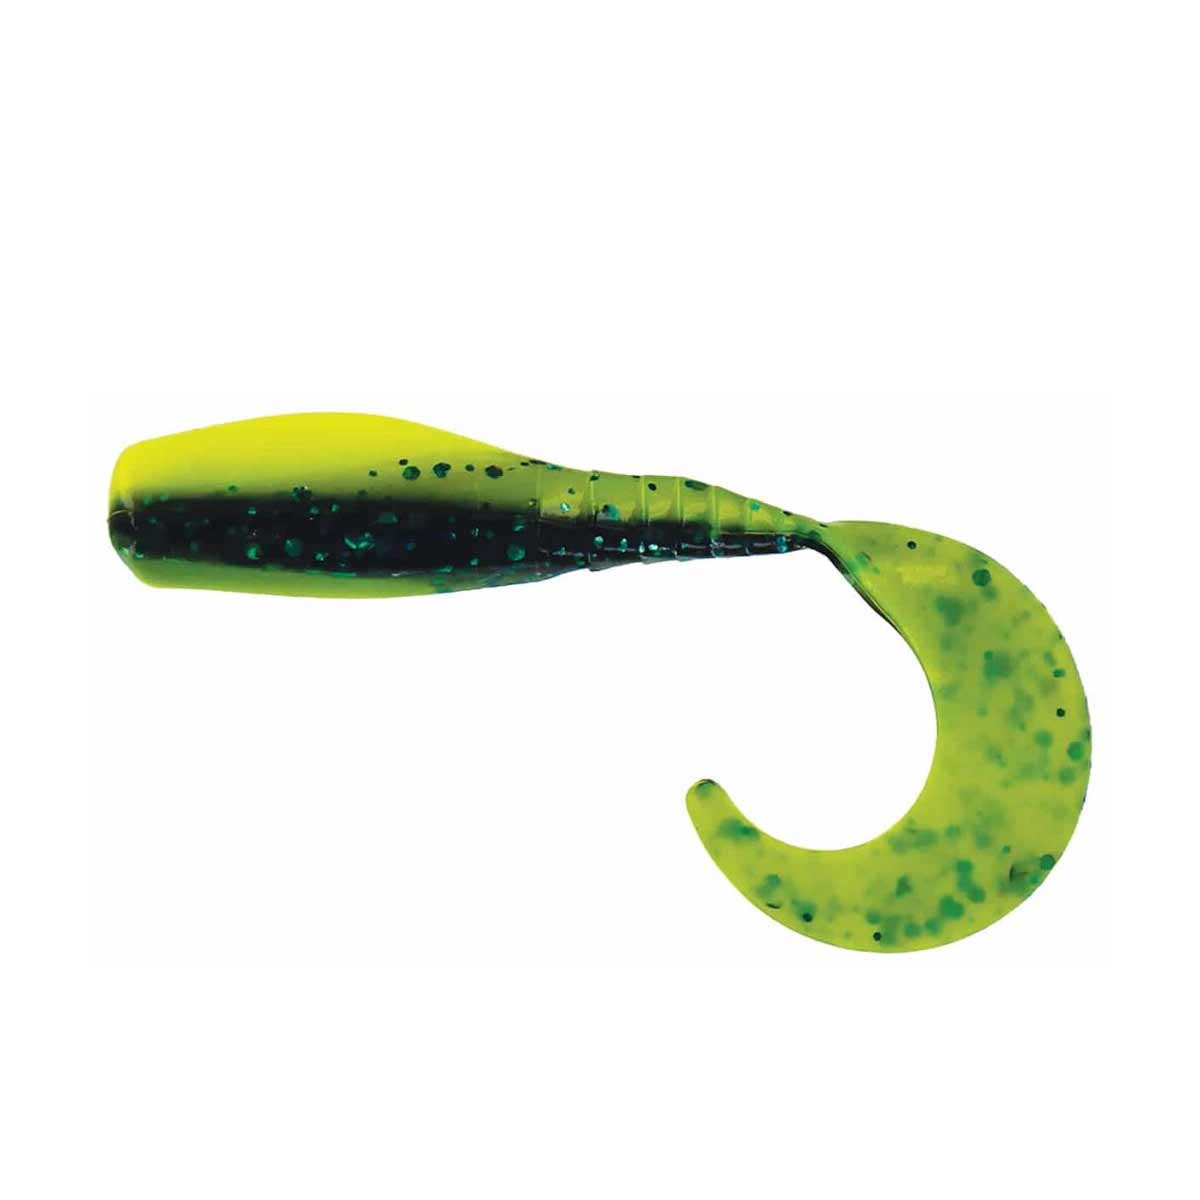 Curly Tail Crappie Minnow_Junebug Chartreuse